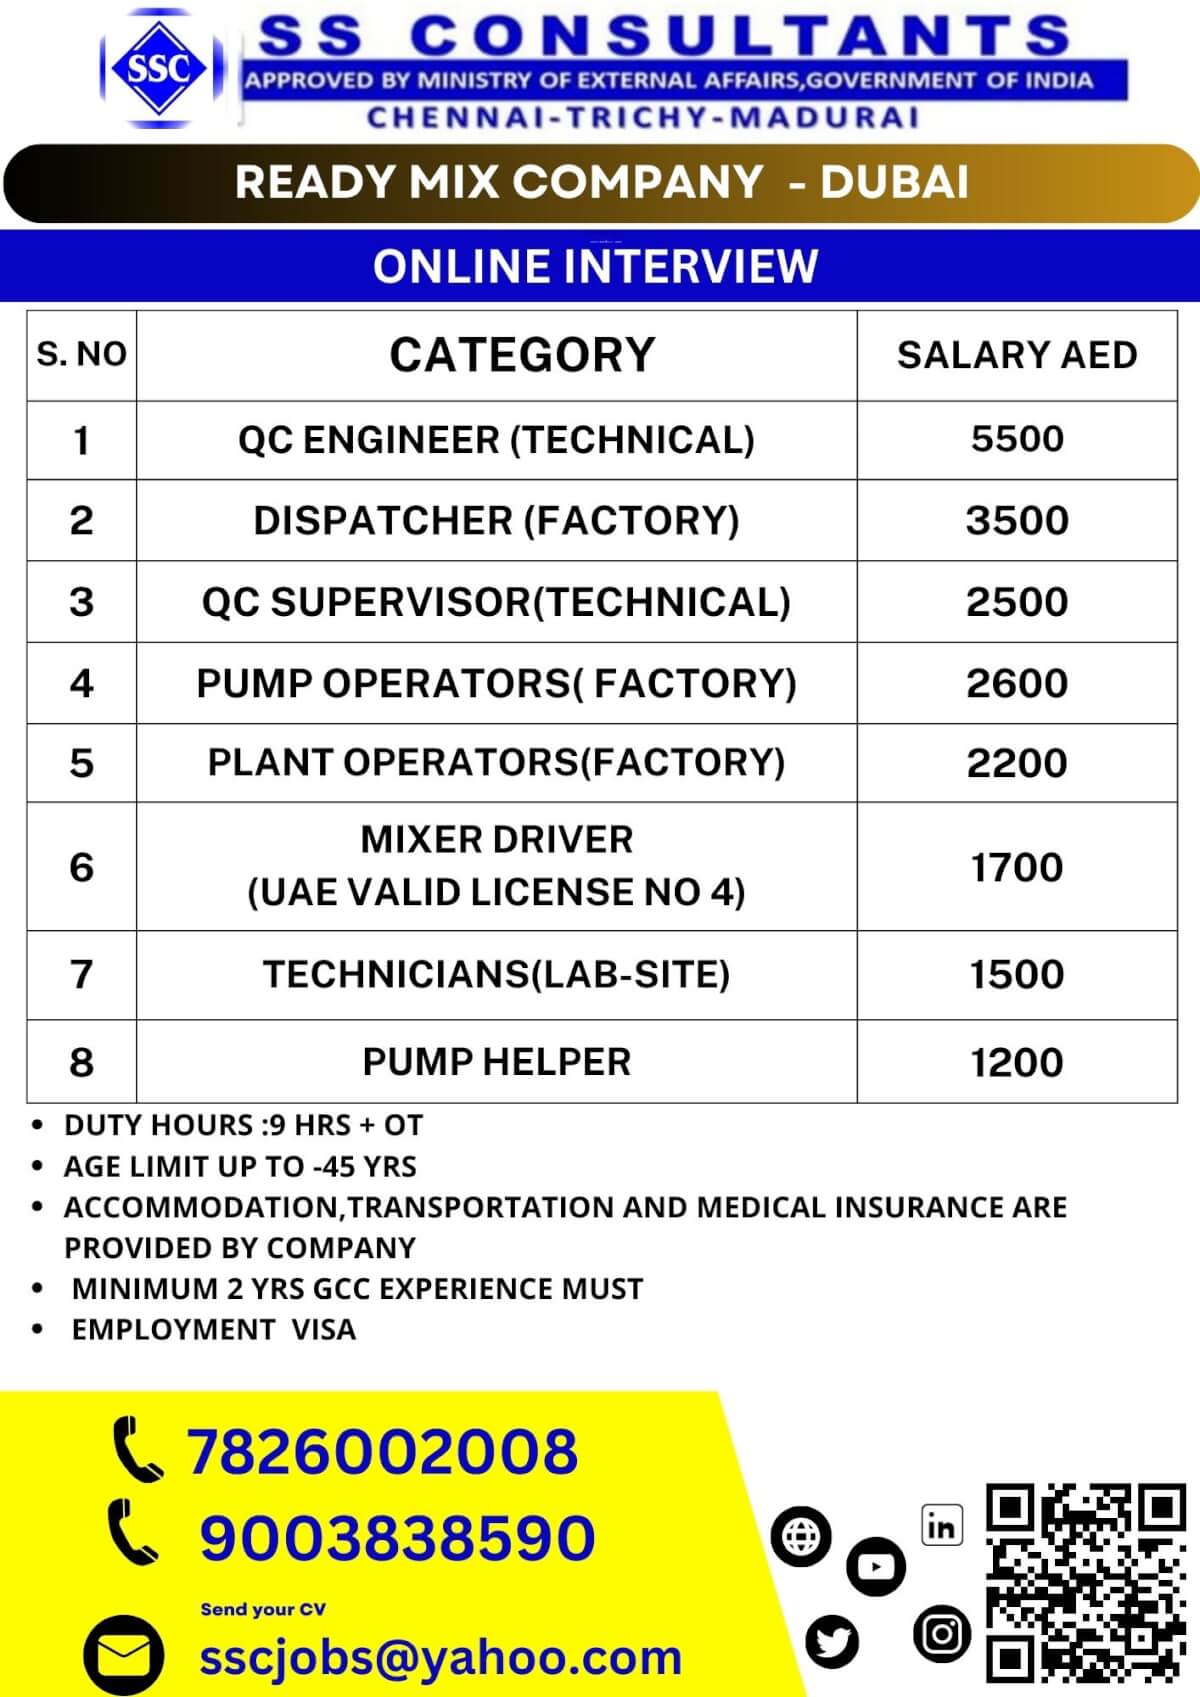 "Immediate Hiring for Ready Mix Company in Dubai: QC Engineers, Supervisors, Operators, Technicians, and More – Apply Now!"